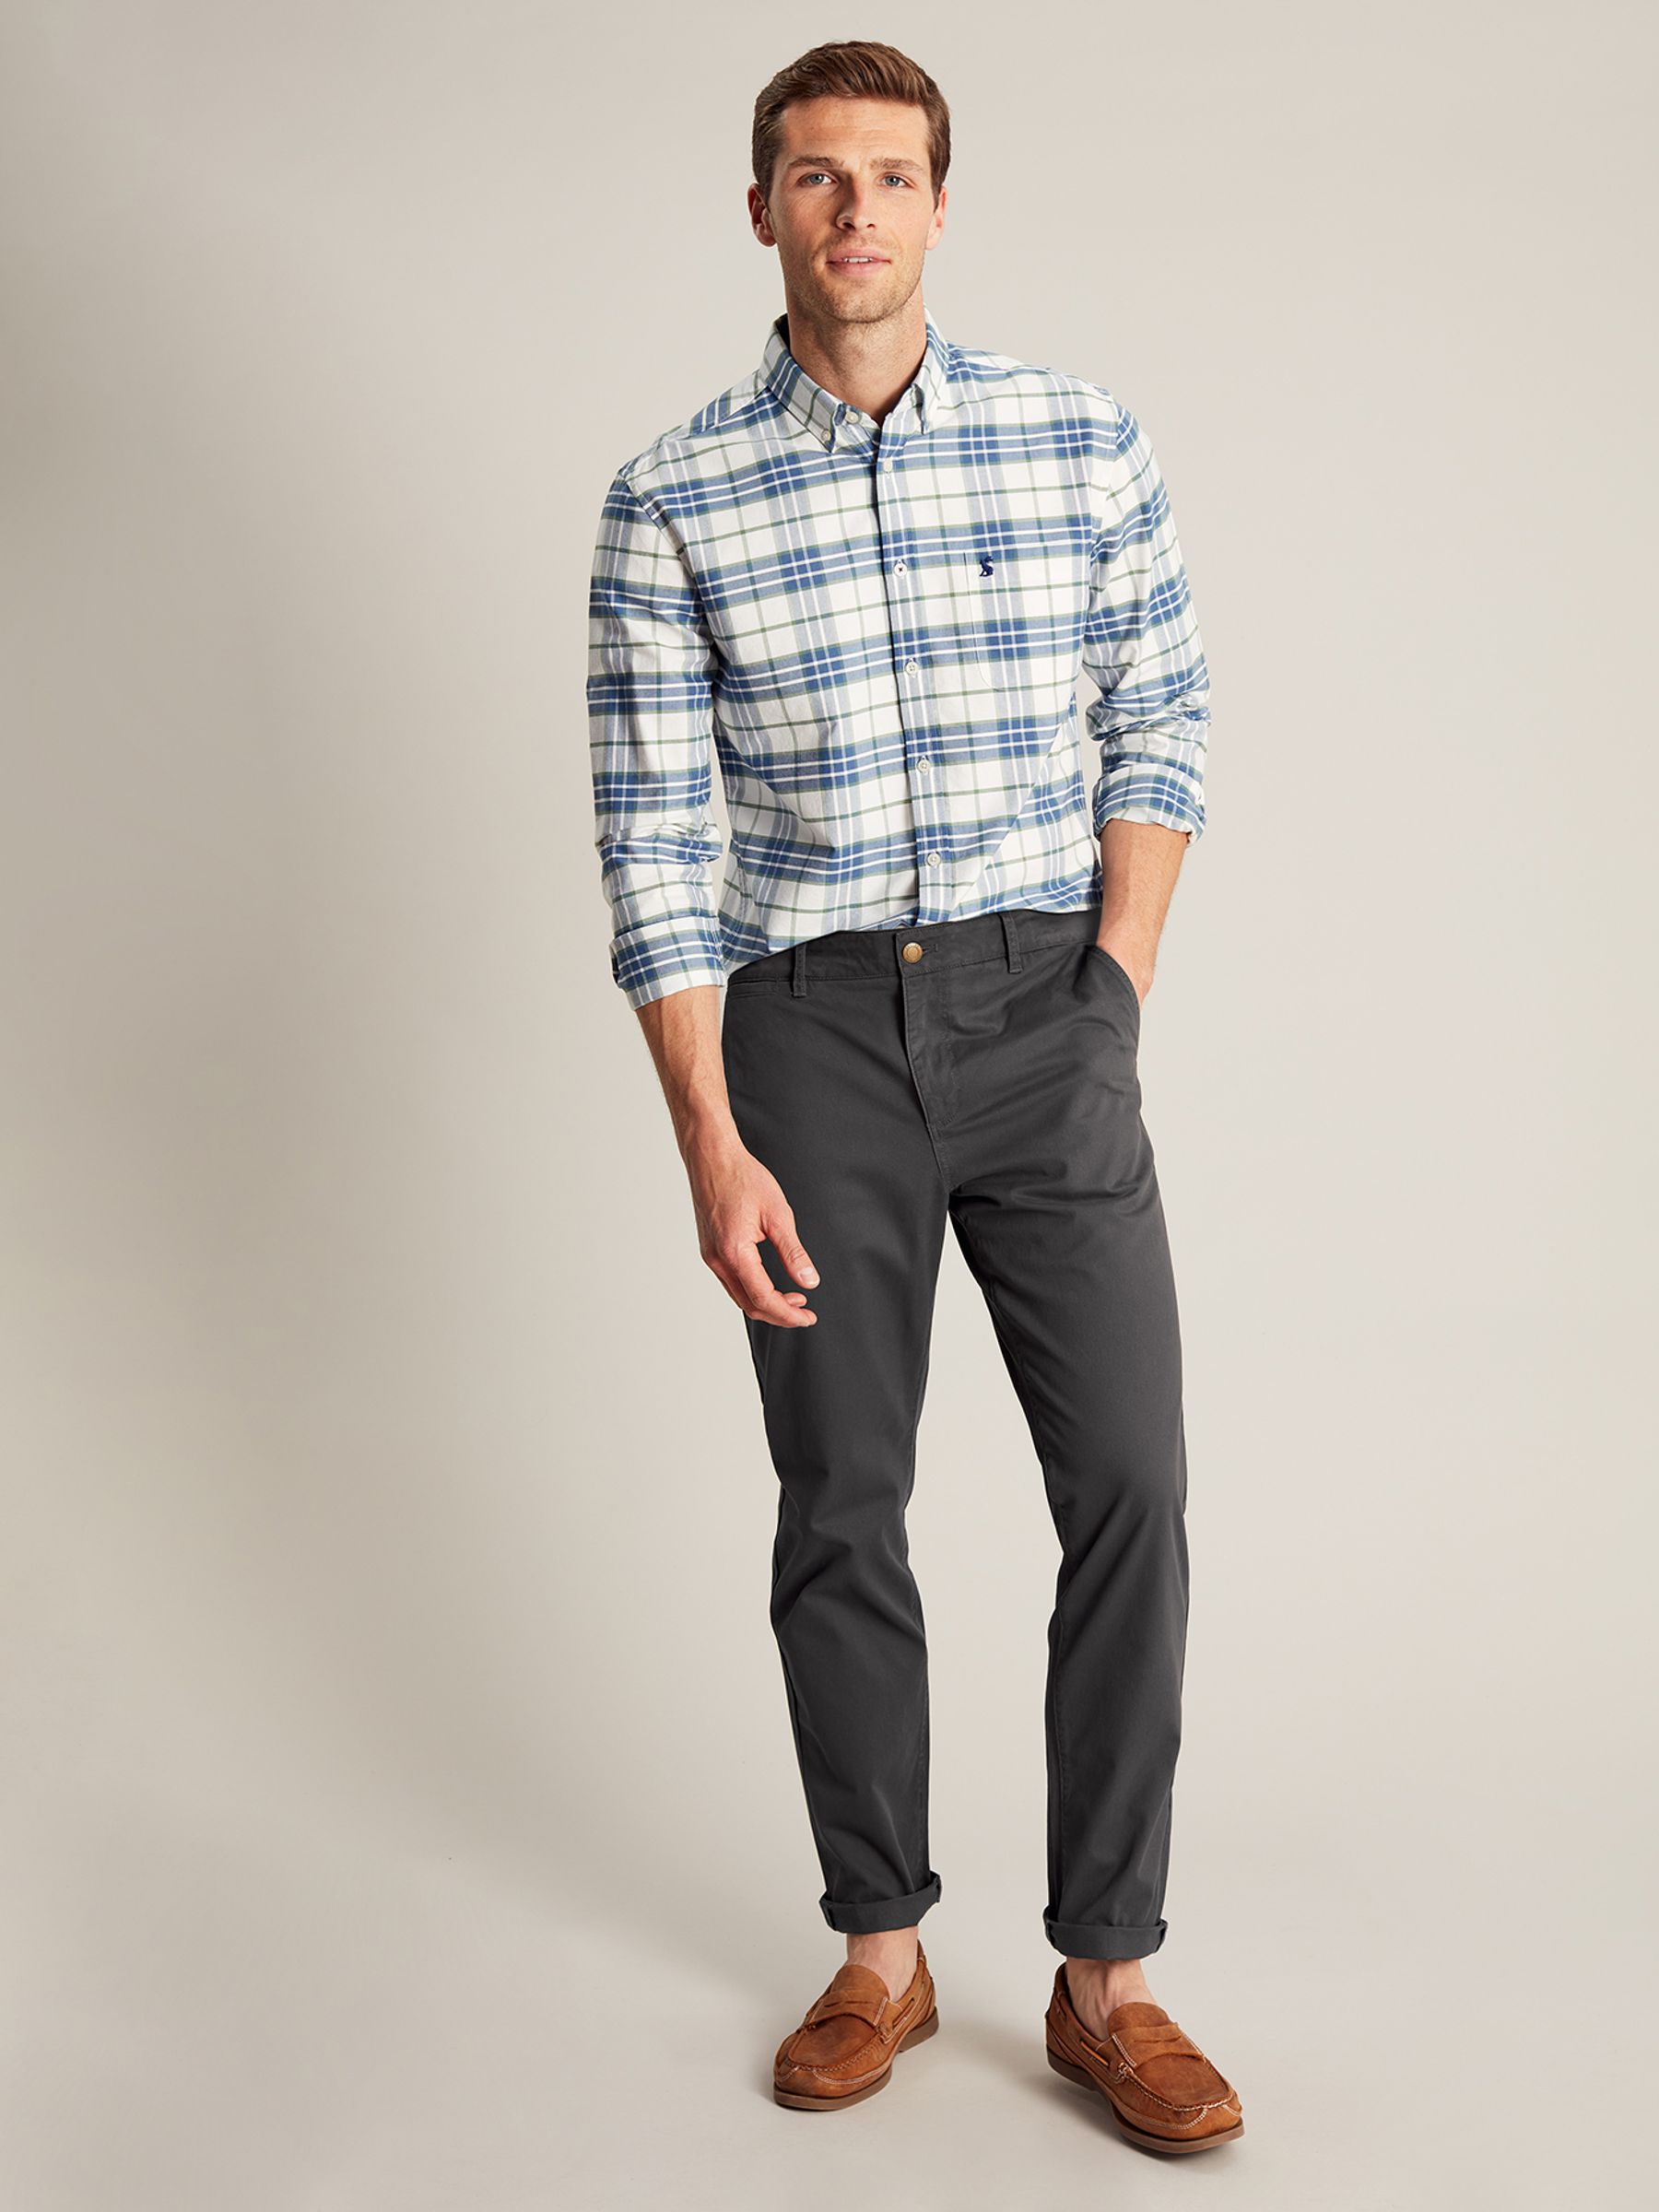 Buy Grey Chinos Trousers from the Joules online shop